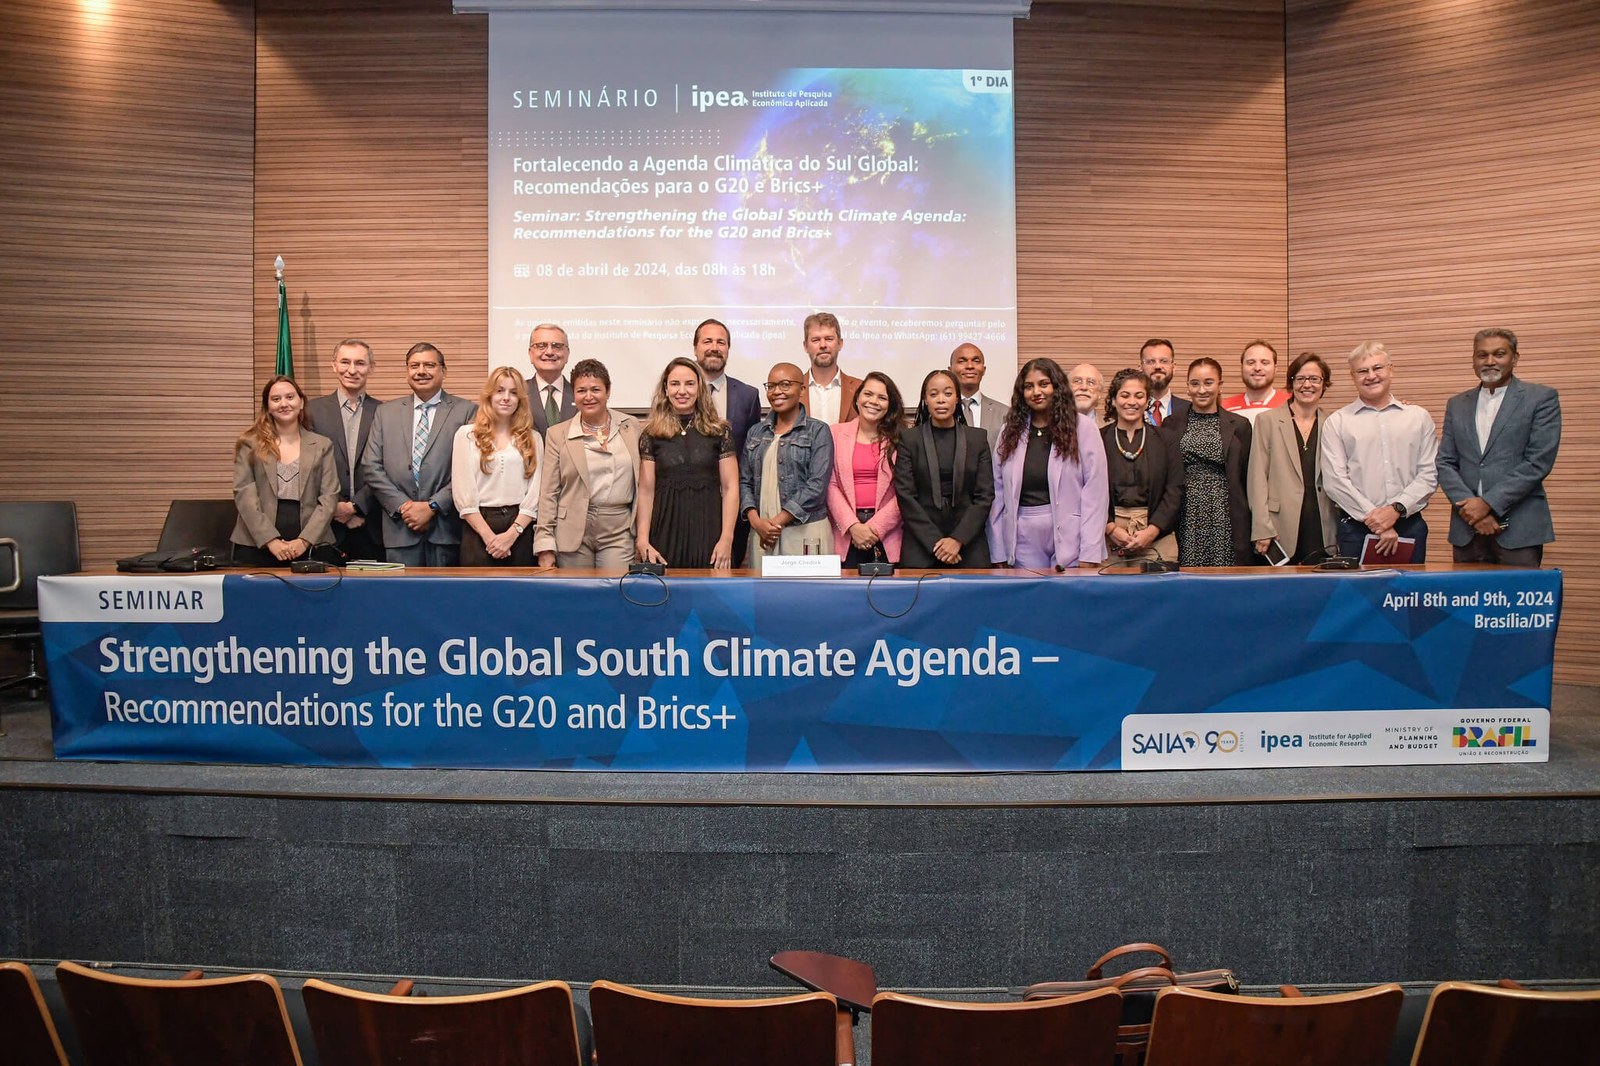 Seminar: Strengthening the Global South Climate Agenda – Recommendations for the G20 and Brics+. Credit: Ipea Publicity/ Helio Montferre